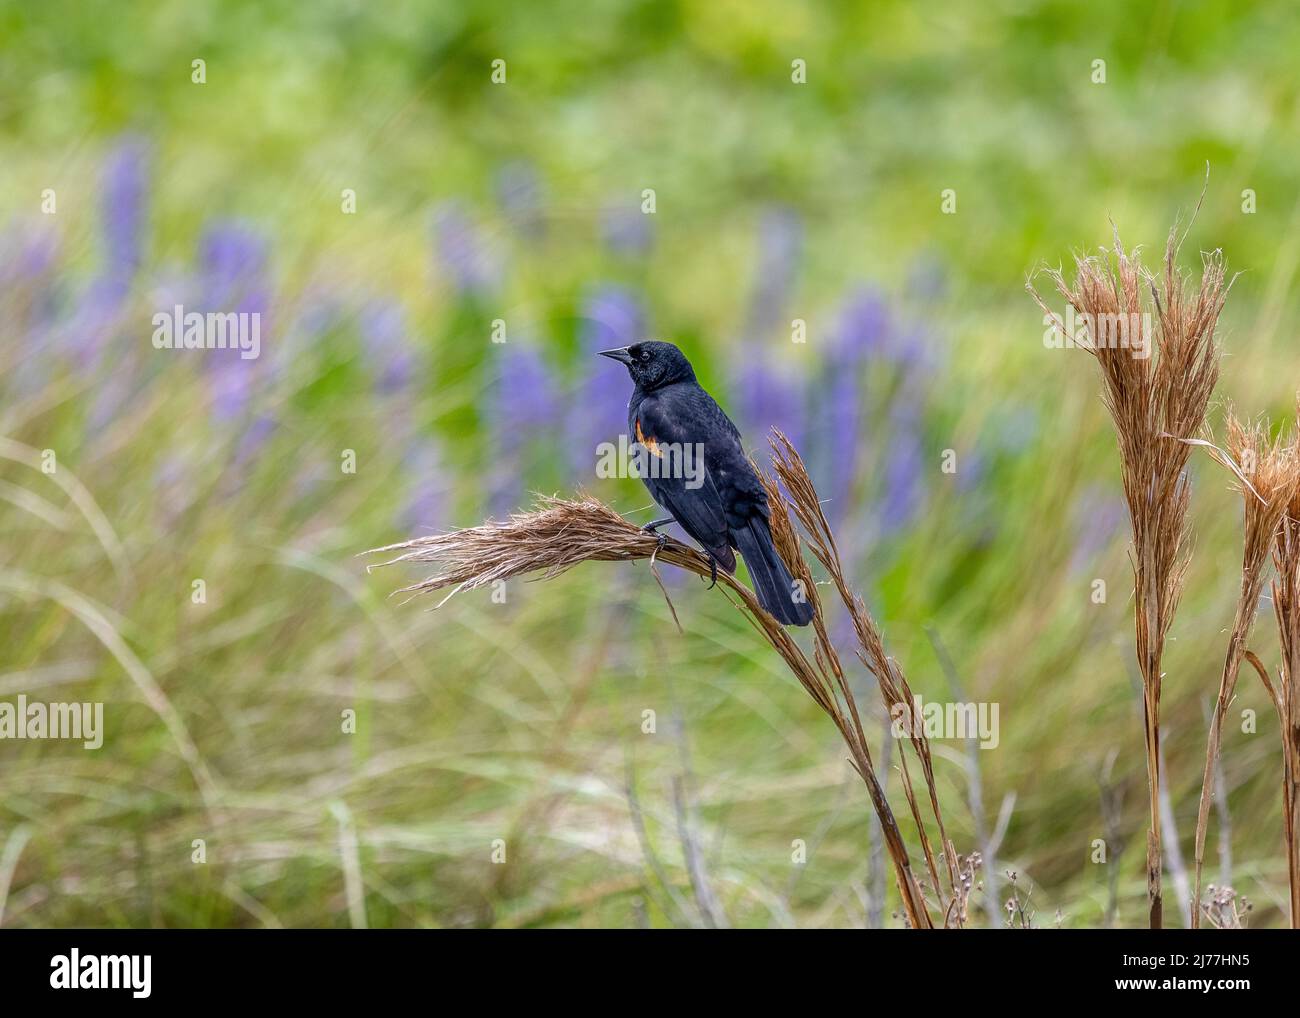 Red-winged Blackbird on red grass in front of pretty purple flowers Stock Photo